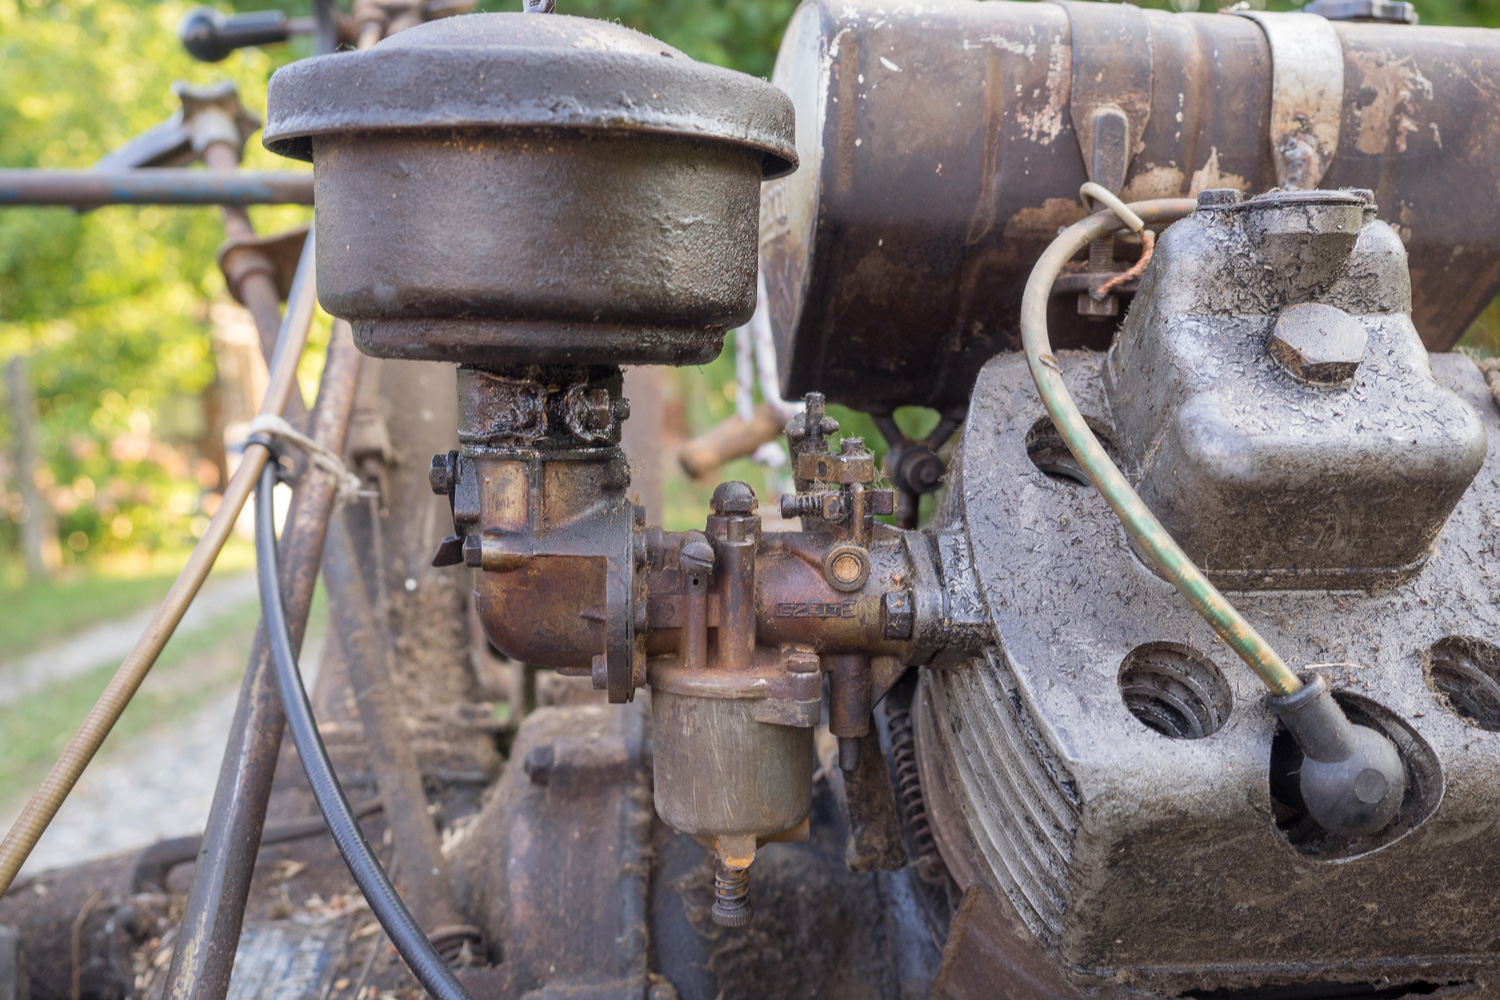 Detail of Guidetti Condor engine on a vintage BCS 622 lawn mower